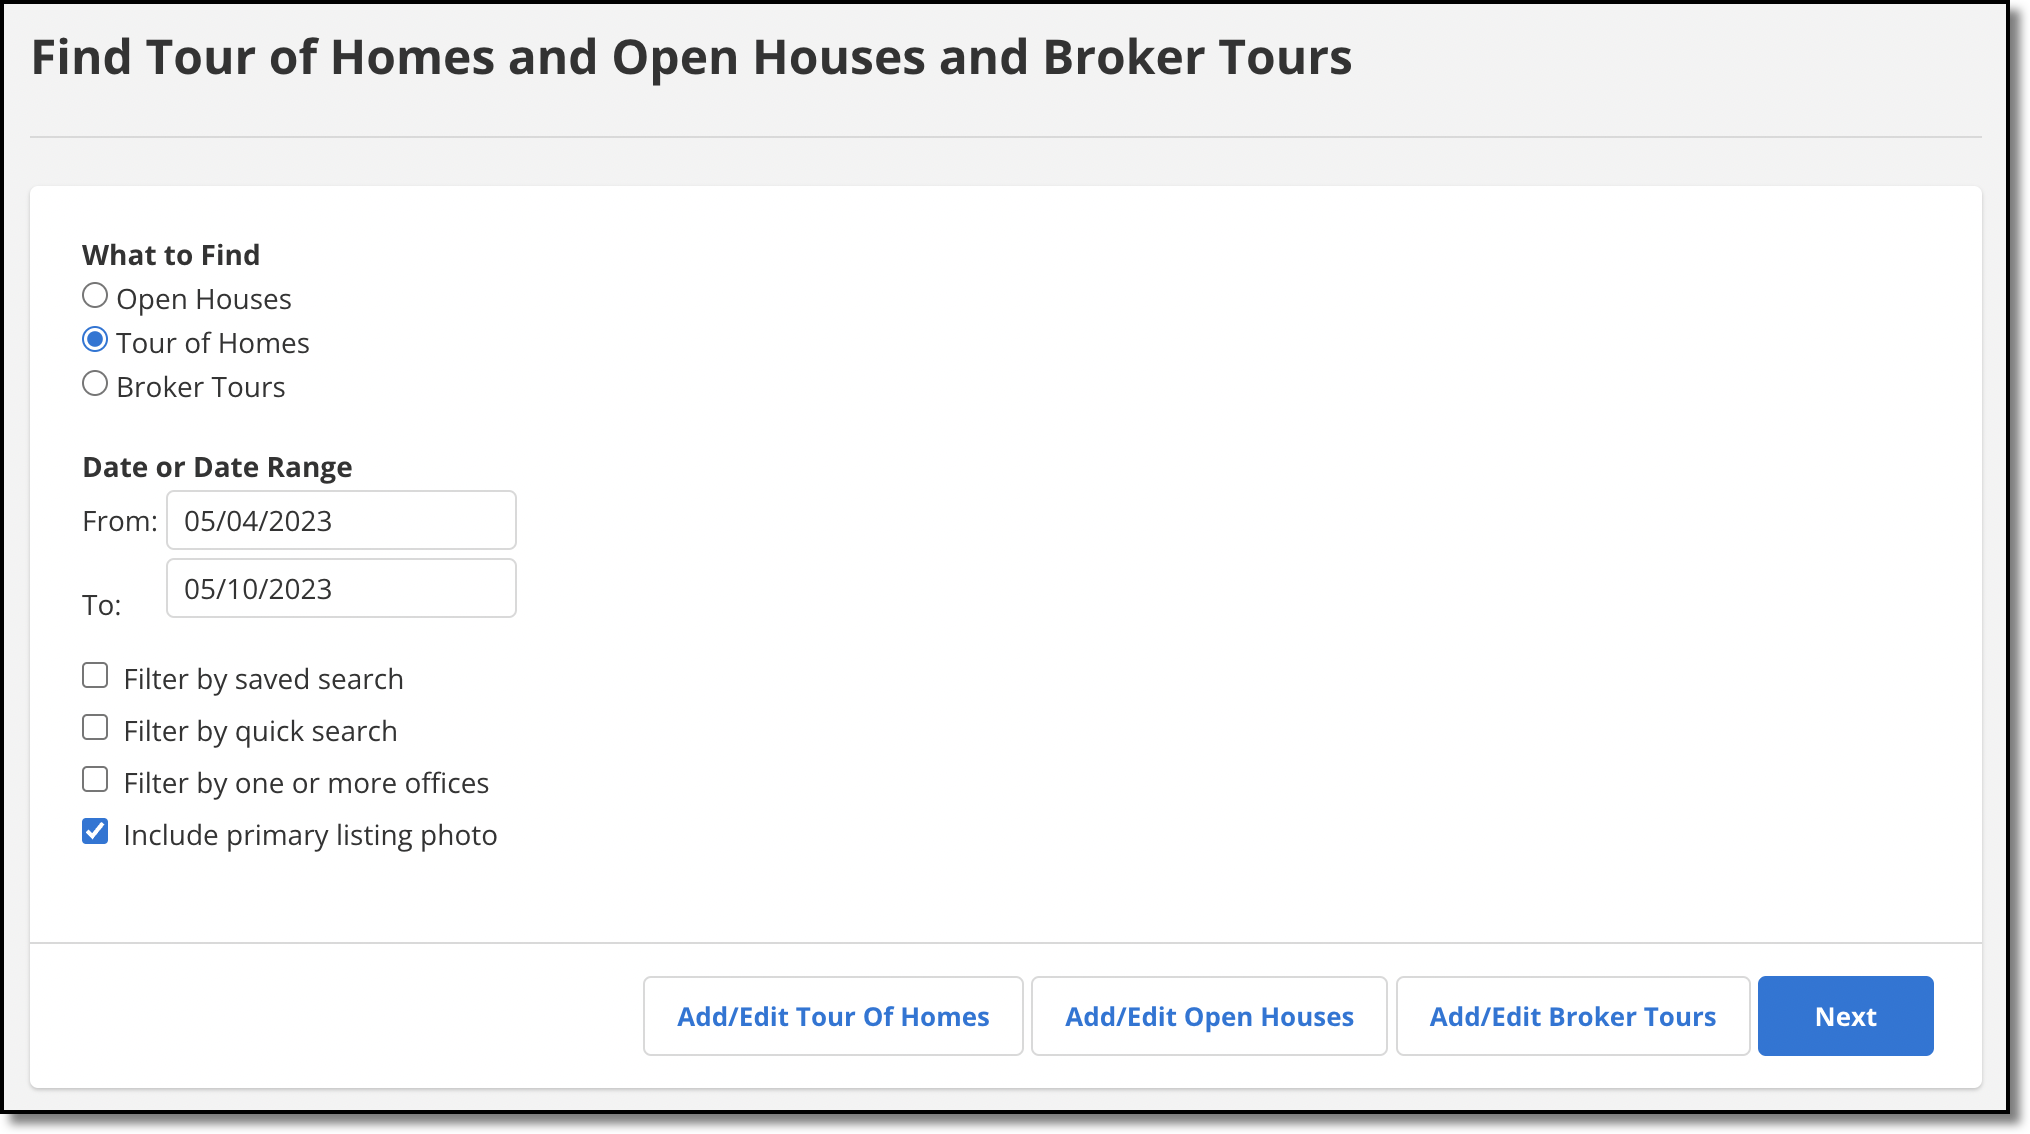 find-tour-openhouse-broker.png